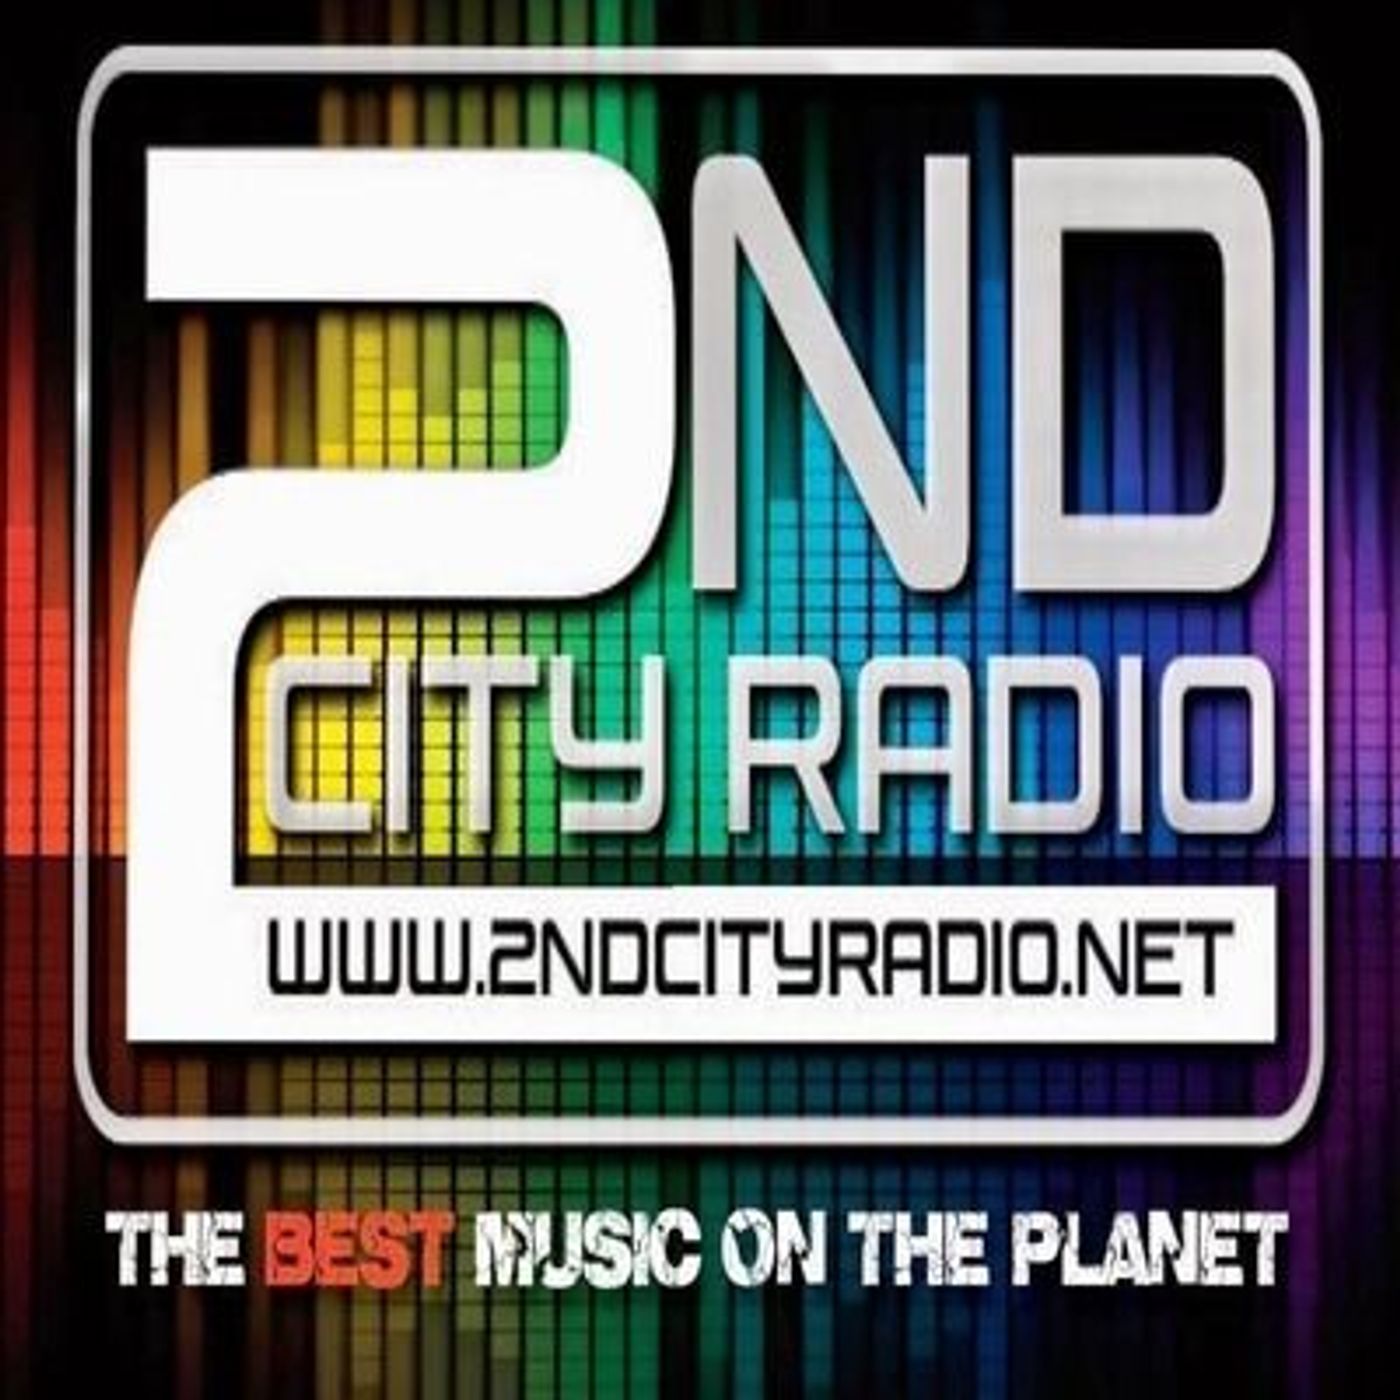 Tuesday the 24th of May 2022 on 2ndcity Radio with Classic Chat